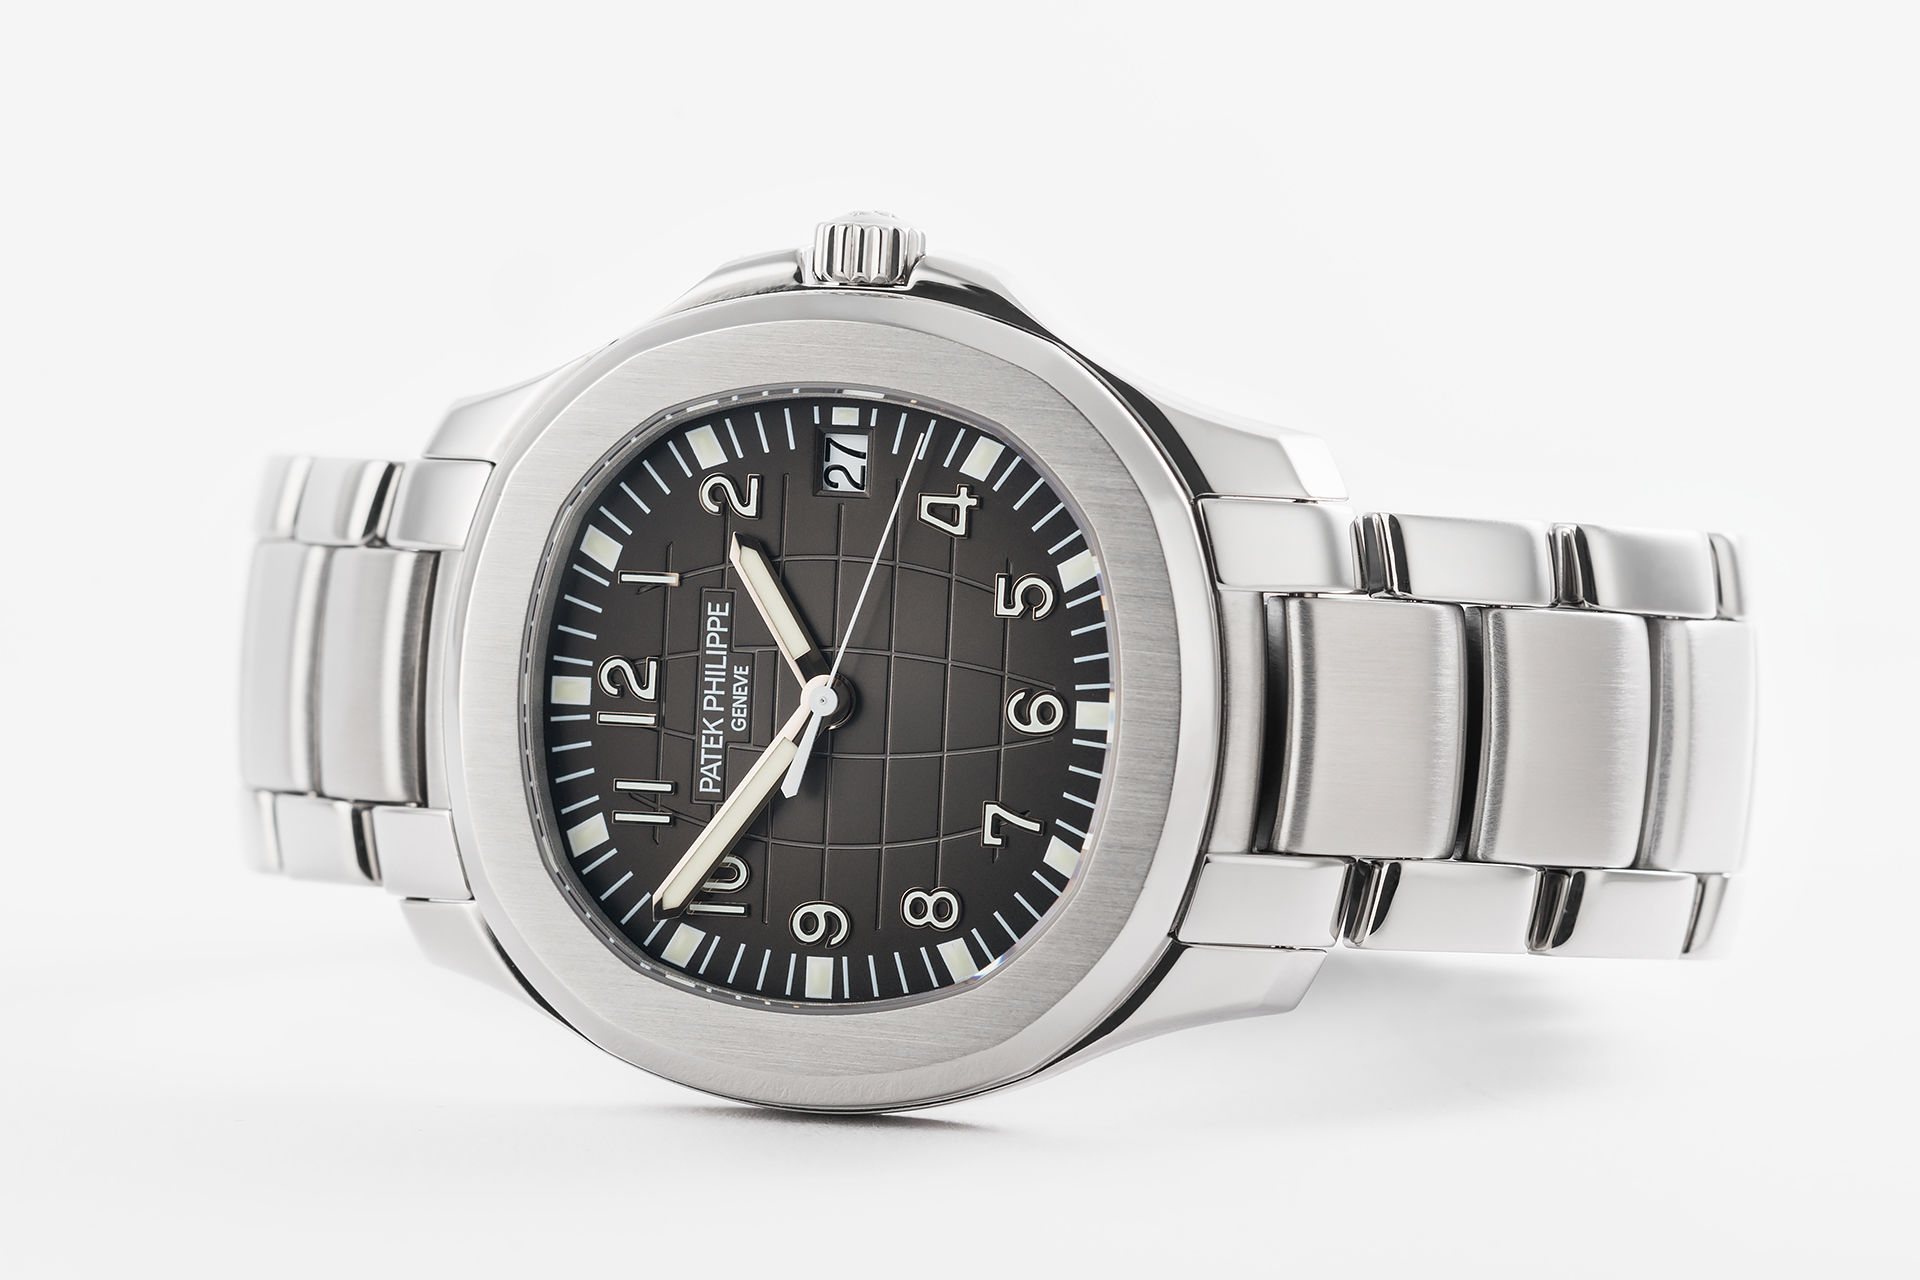 ref 5167/1A-001 | Full Set With Additional Strap | Patek Philippe Aquanaut